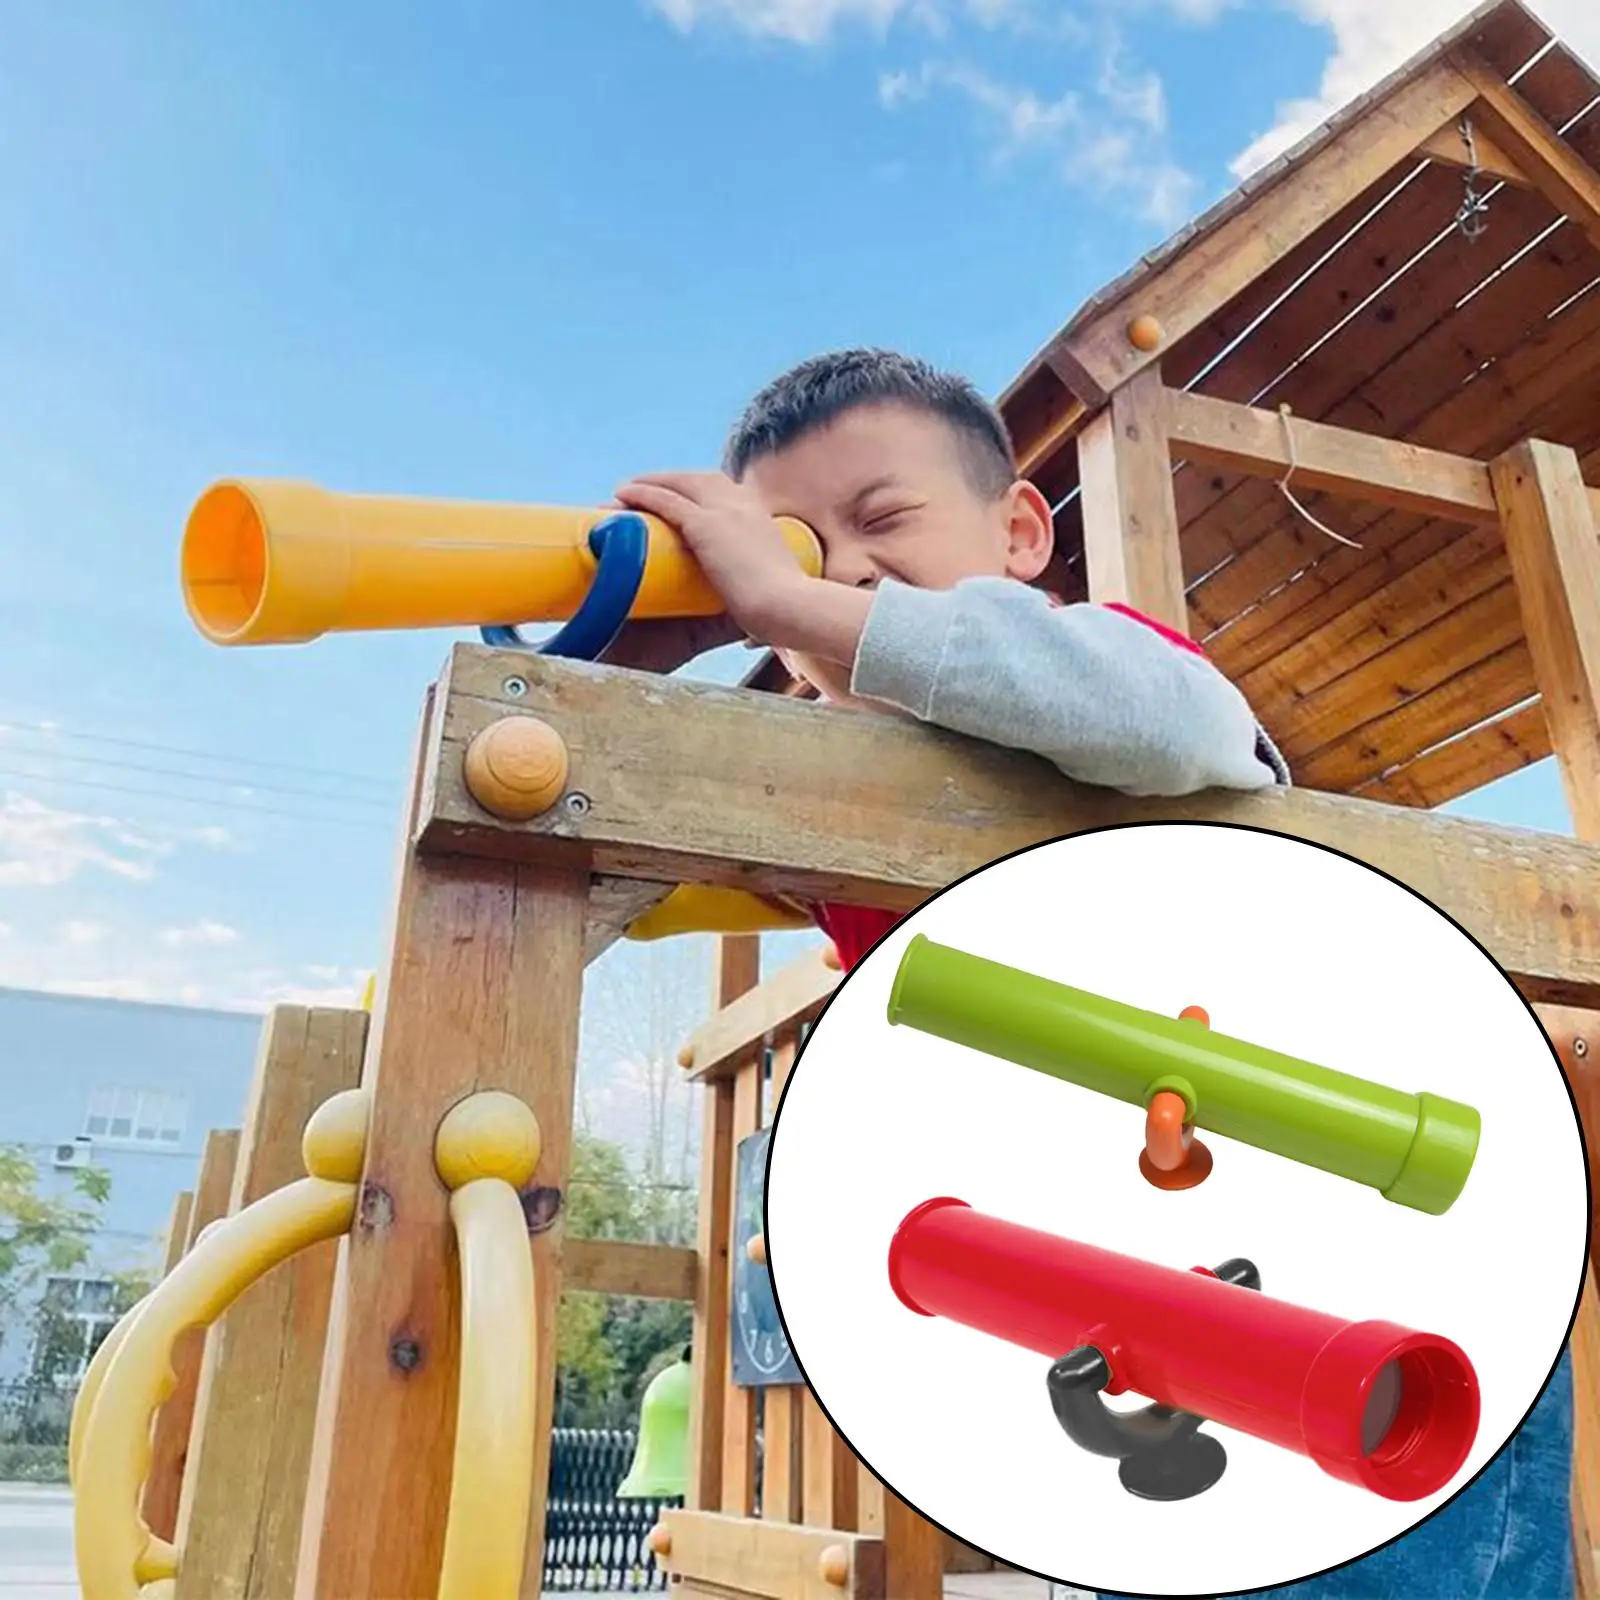 Playground Monocular Toy Playhouse Slide Swing Set for Kids Children Ages 3+